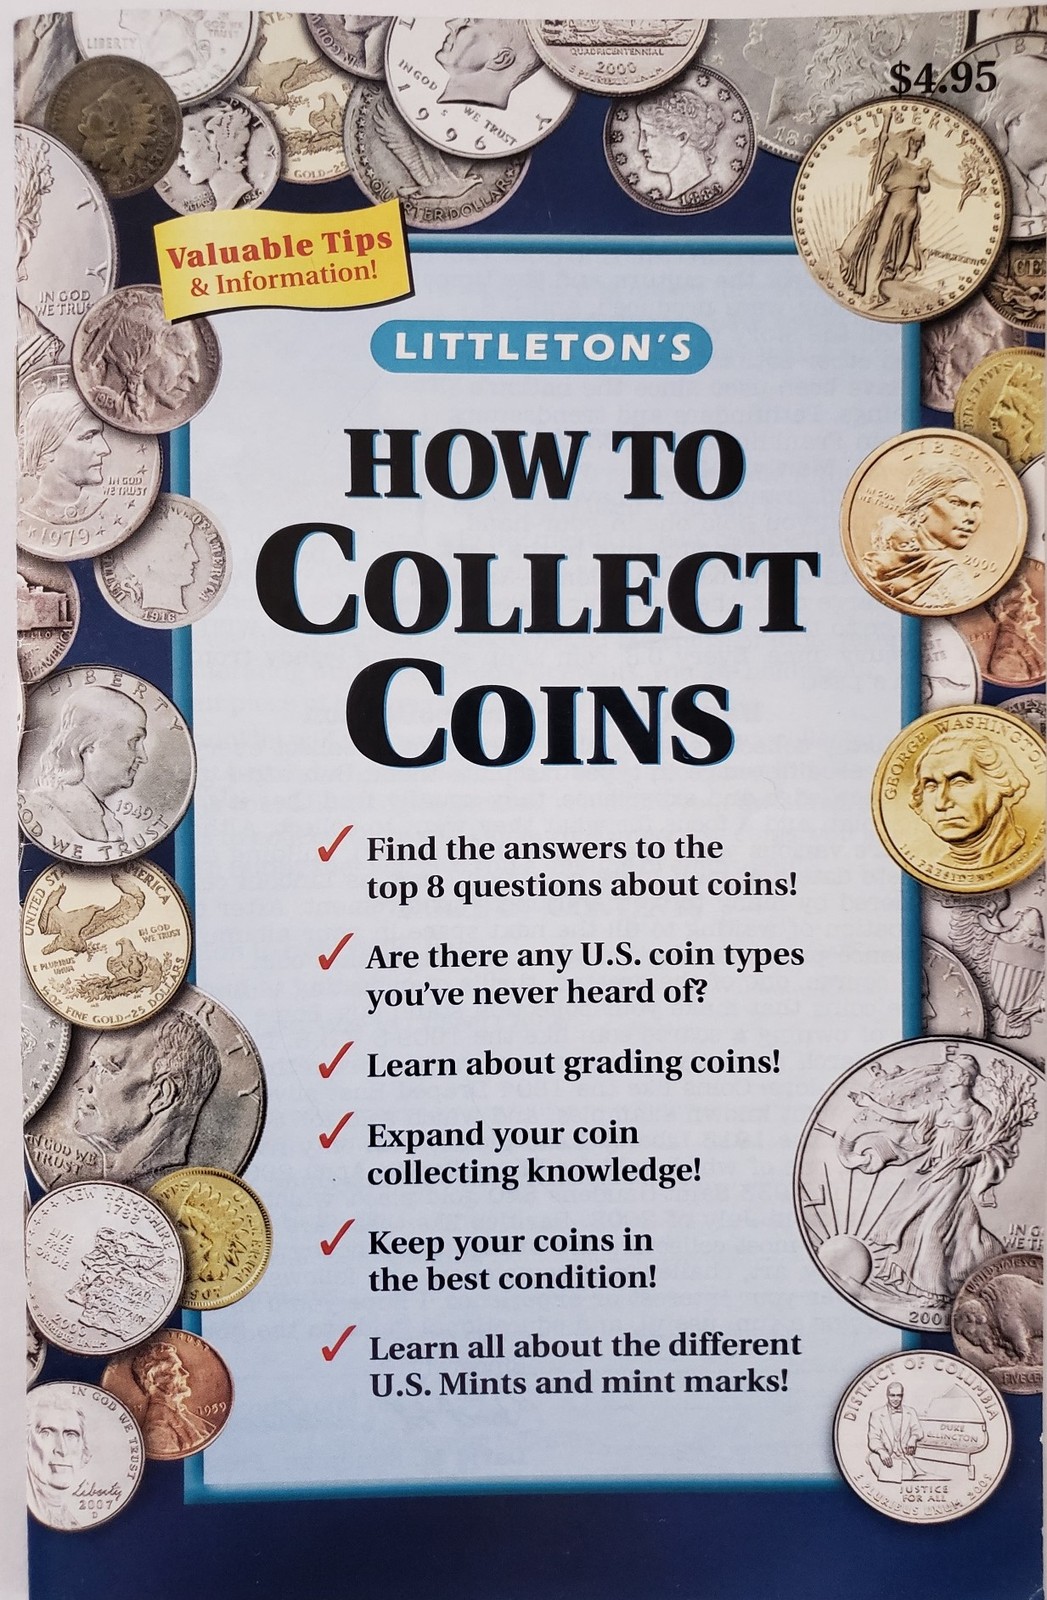 How To Collect Coins by Littleton - $7.95